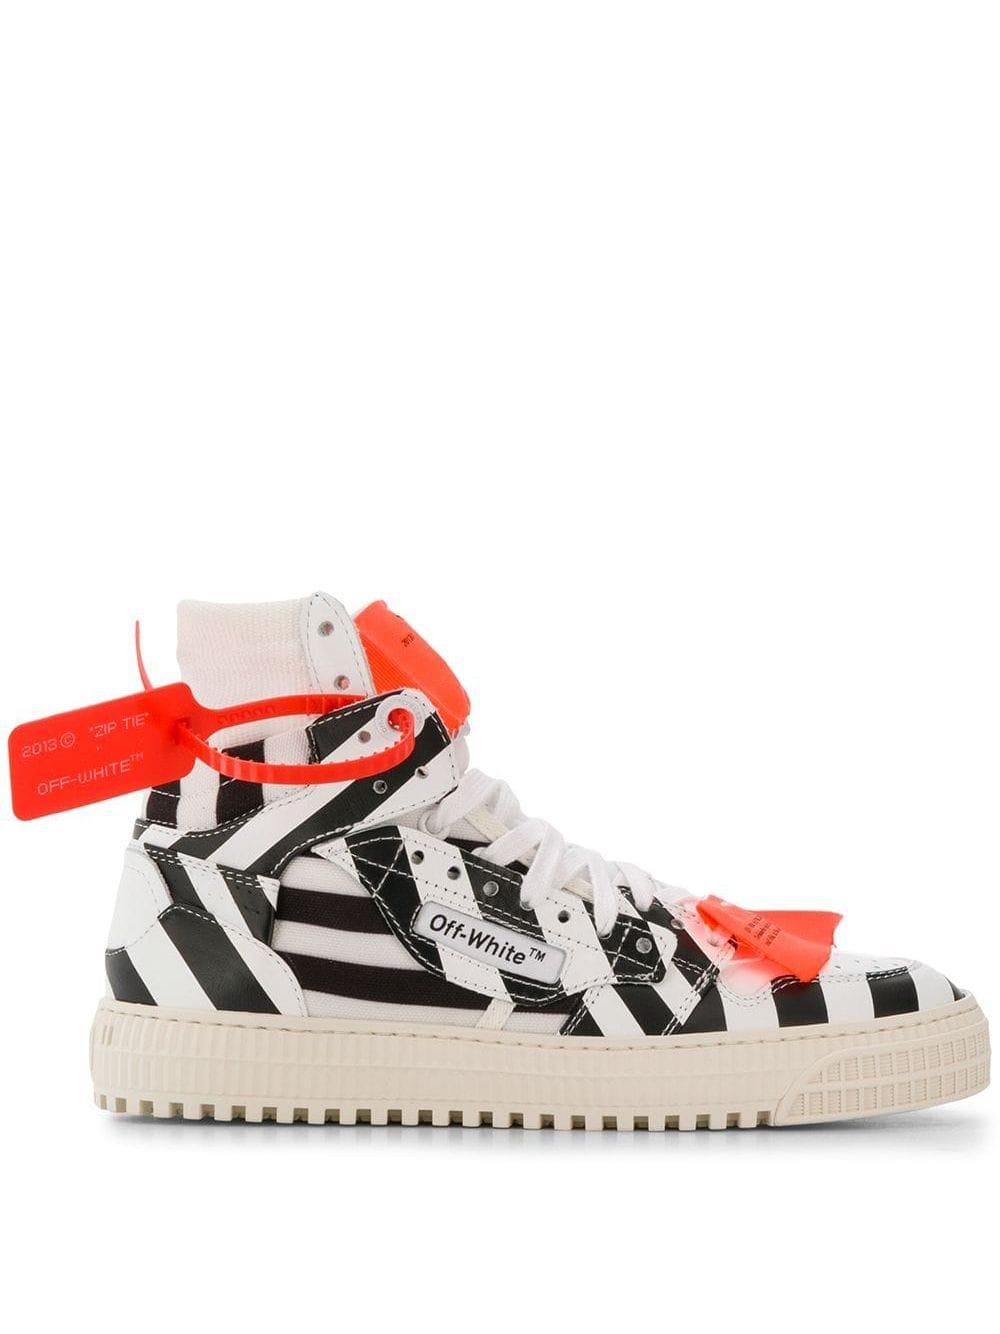 Off-White c/o Virgil Abloh Striped 3.0 Off-court Sneakers in White | Lyst